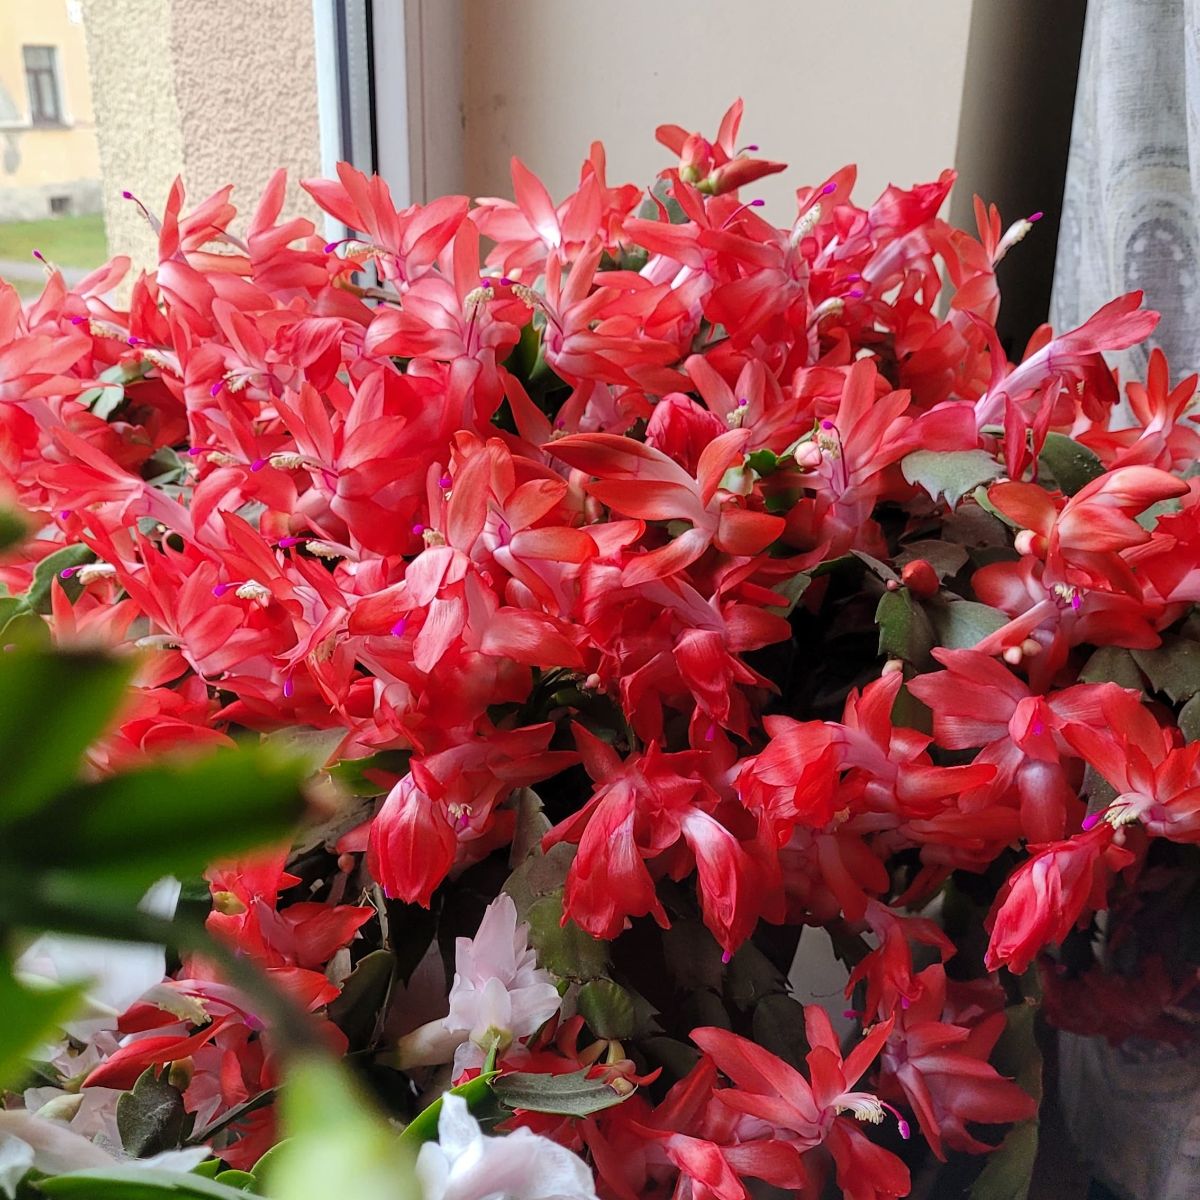 Close-up of a beautiful red Christmas cactus in bloom.